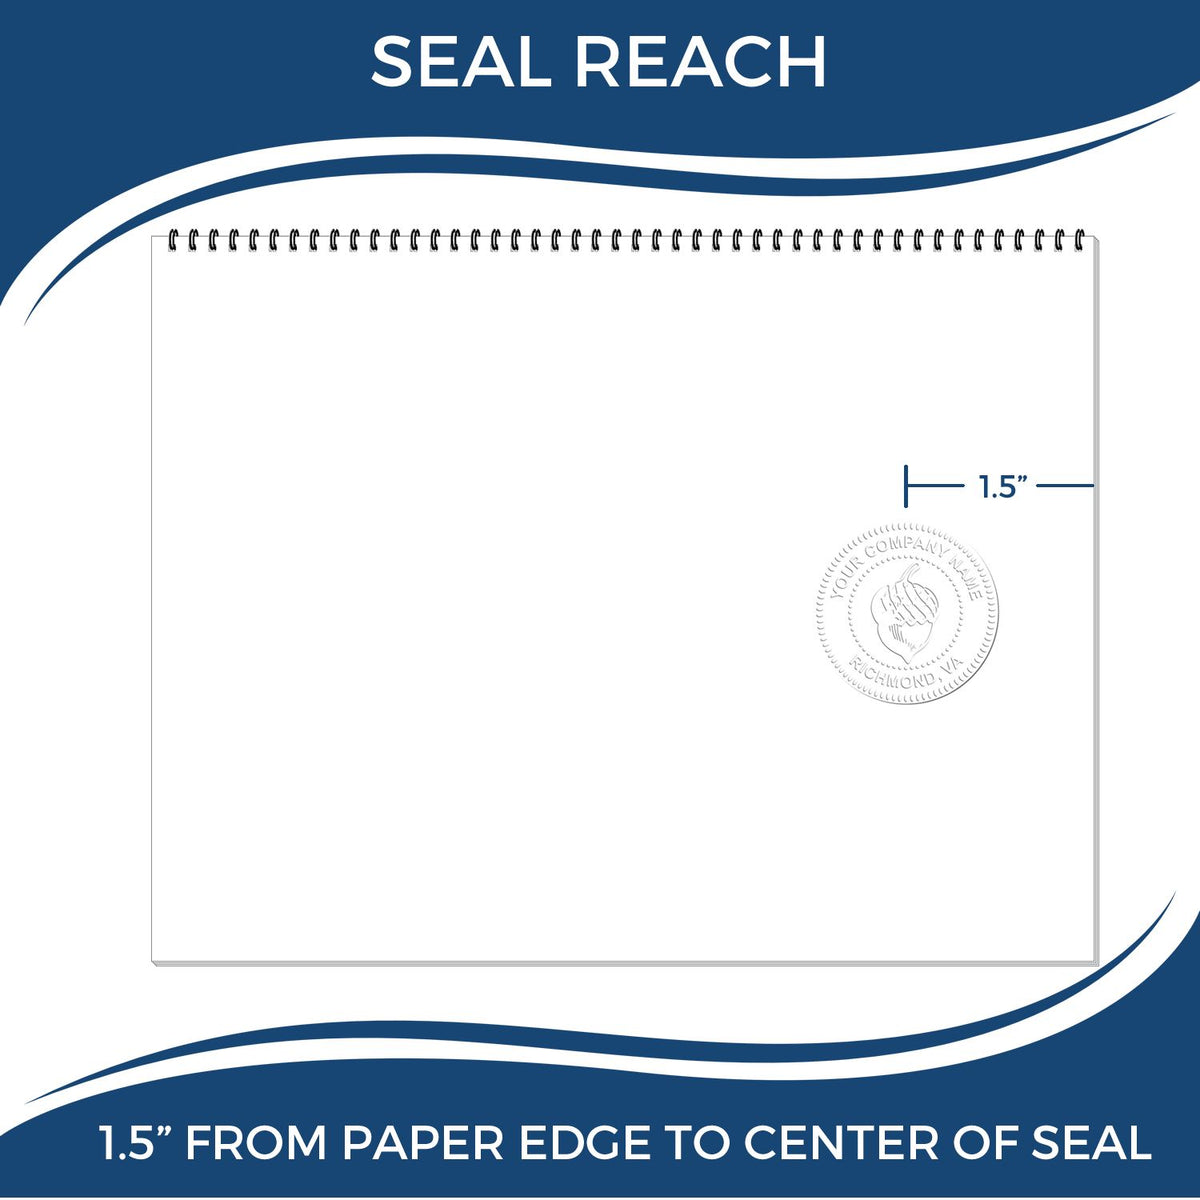 An infographic showing the seal reach which is represented by a ruler and a miniature seal image of the South Carolina Engineer Desk Seal